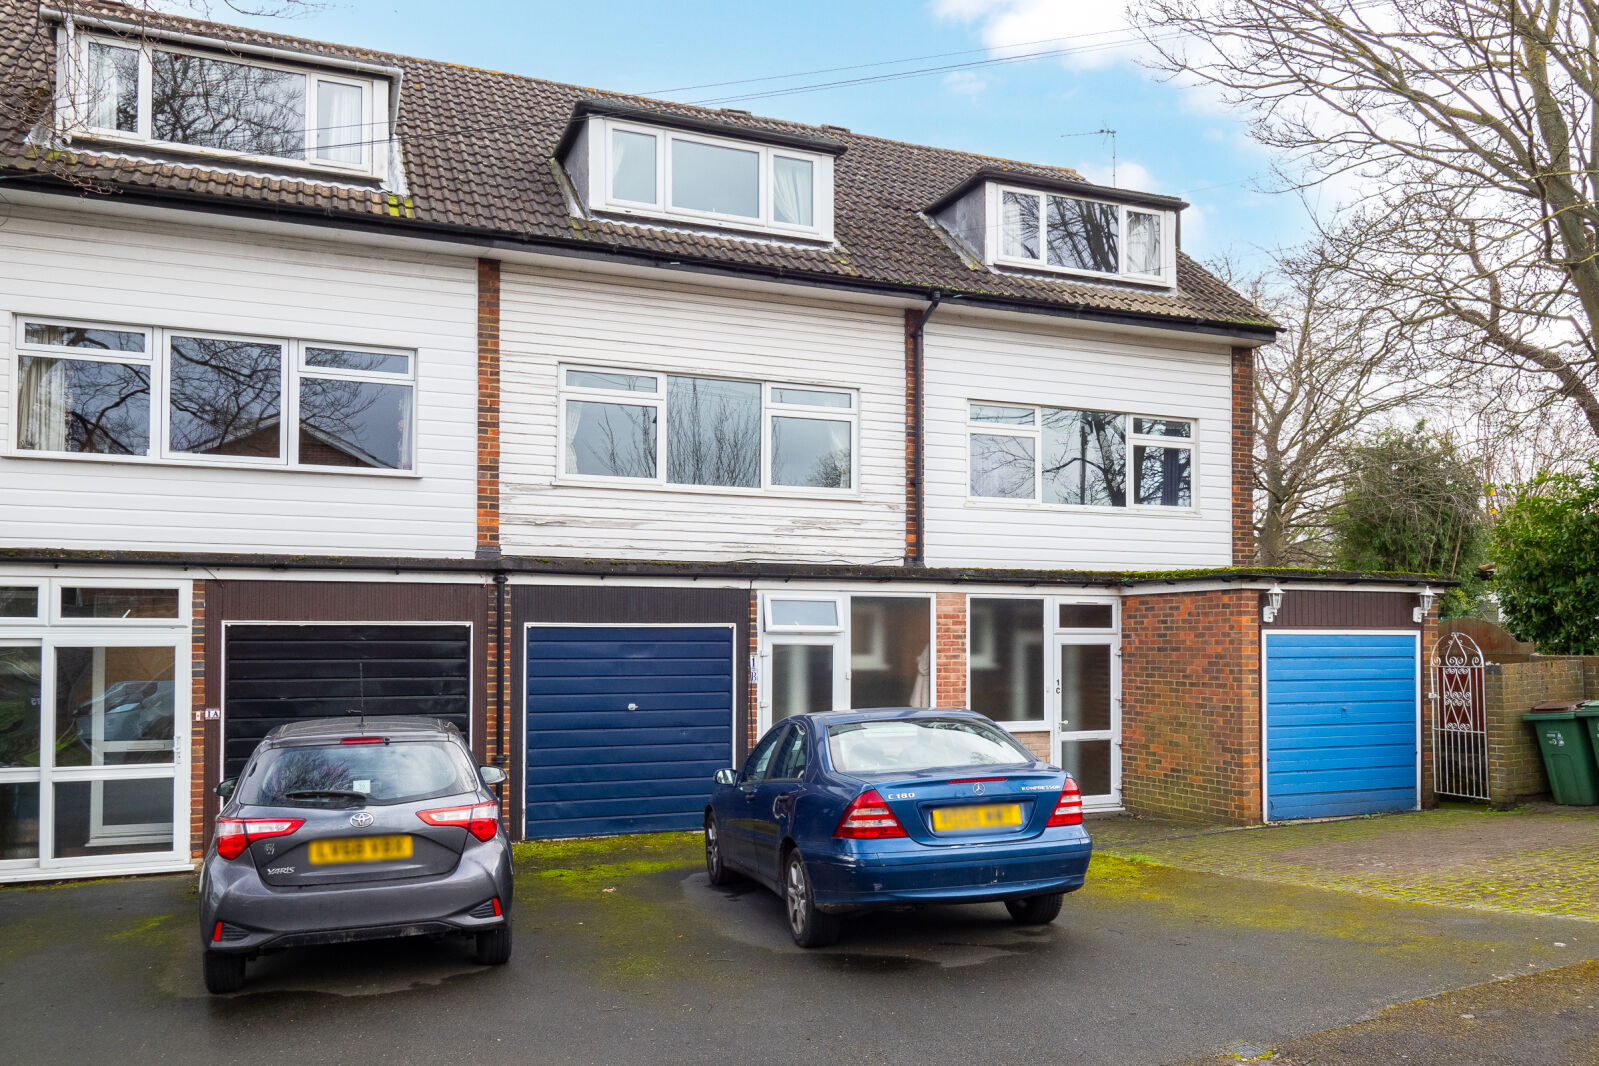 3 bedroom mid terraced house for sale Park Hill Close, Carshalton, SM5, main image